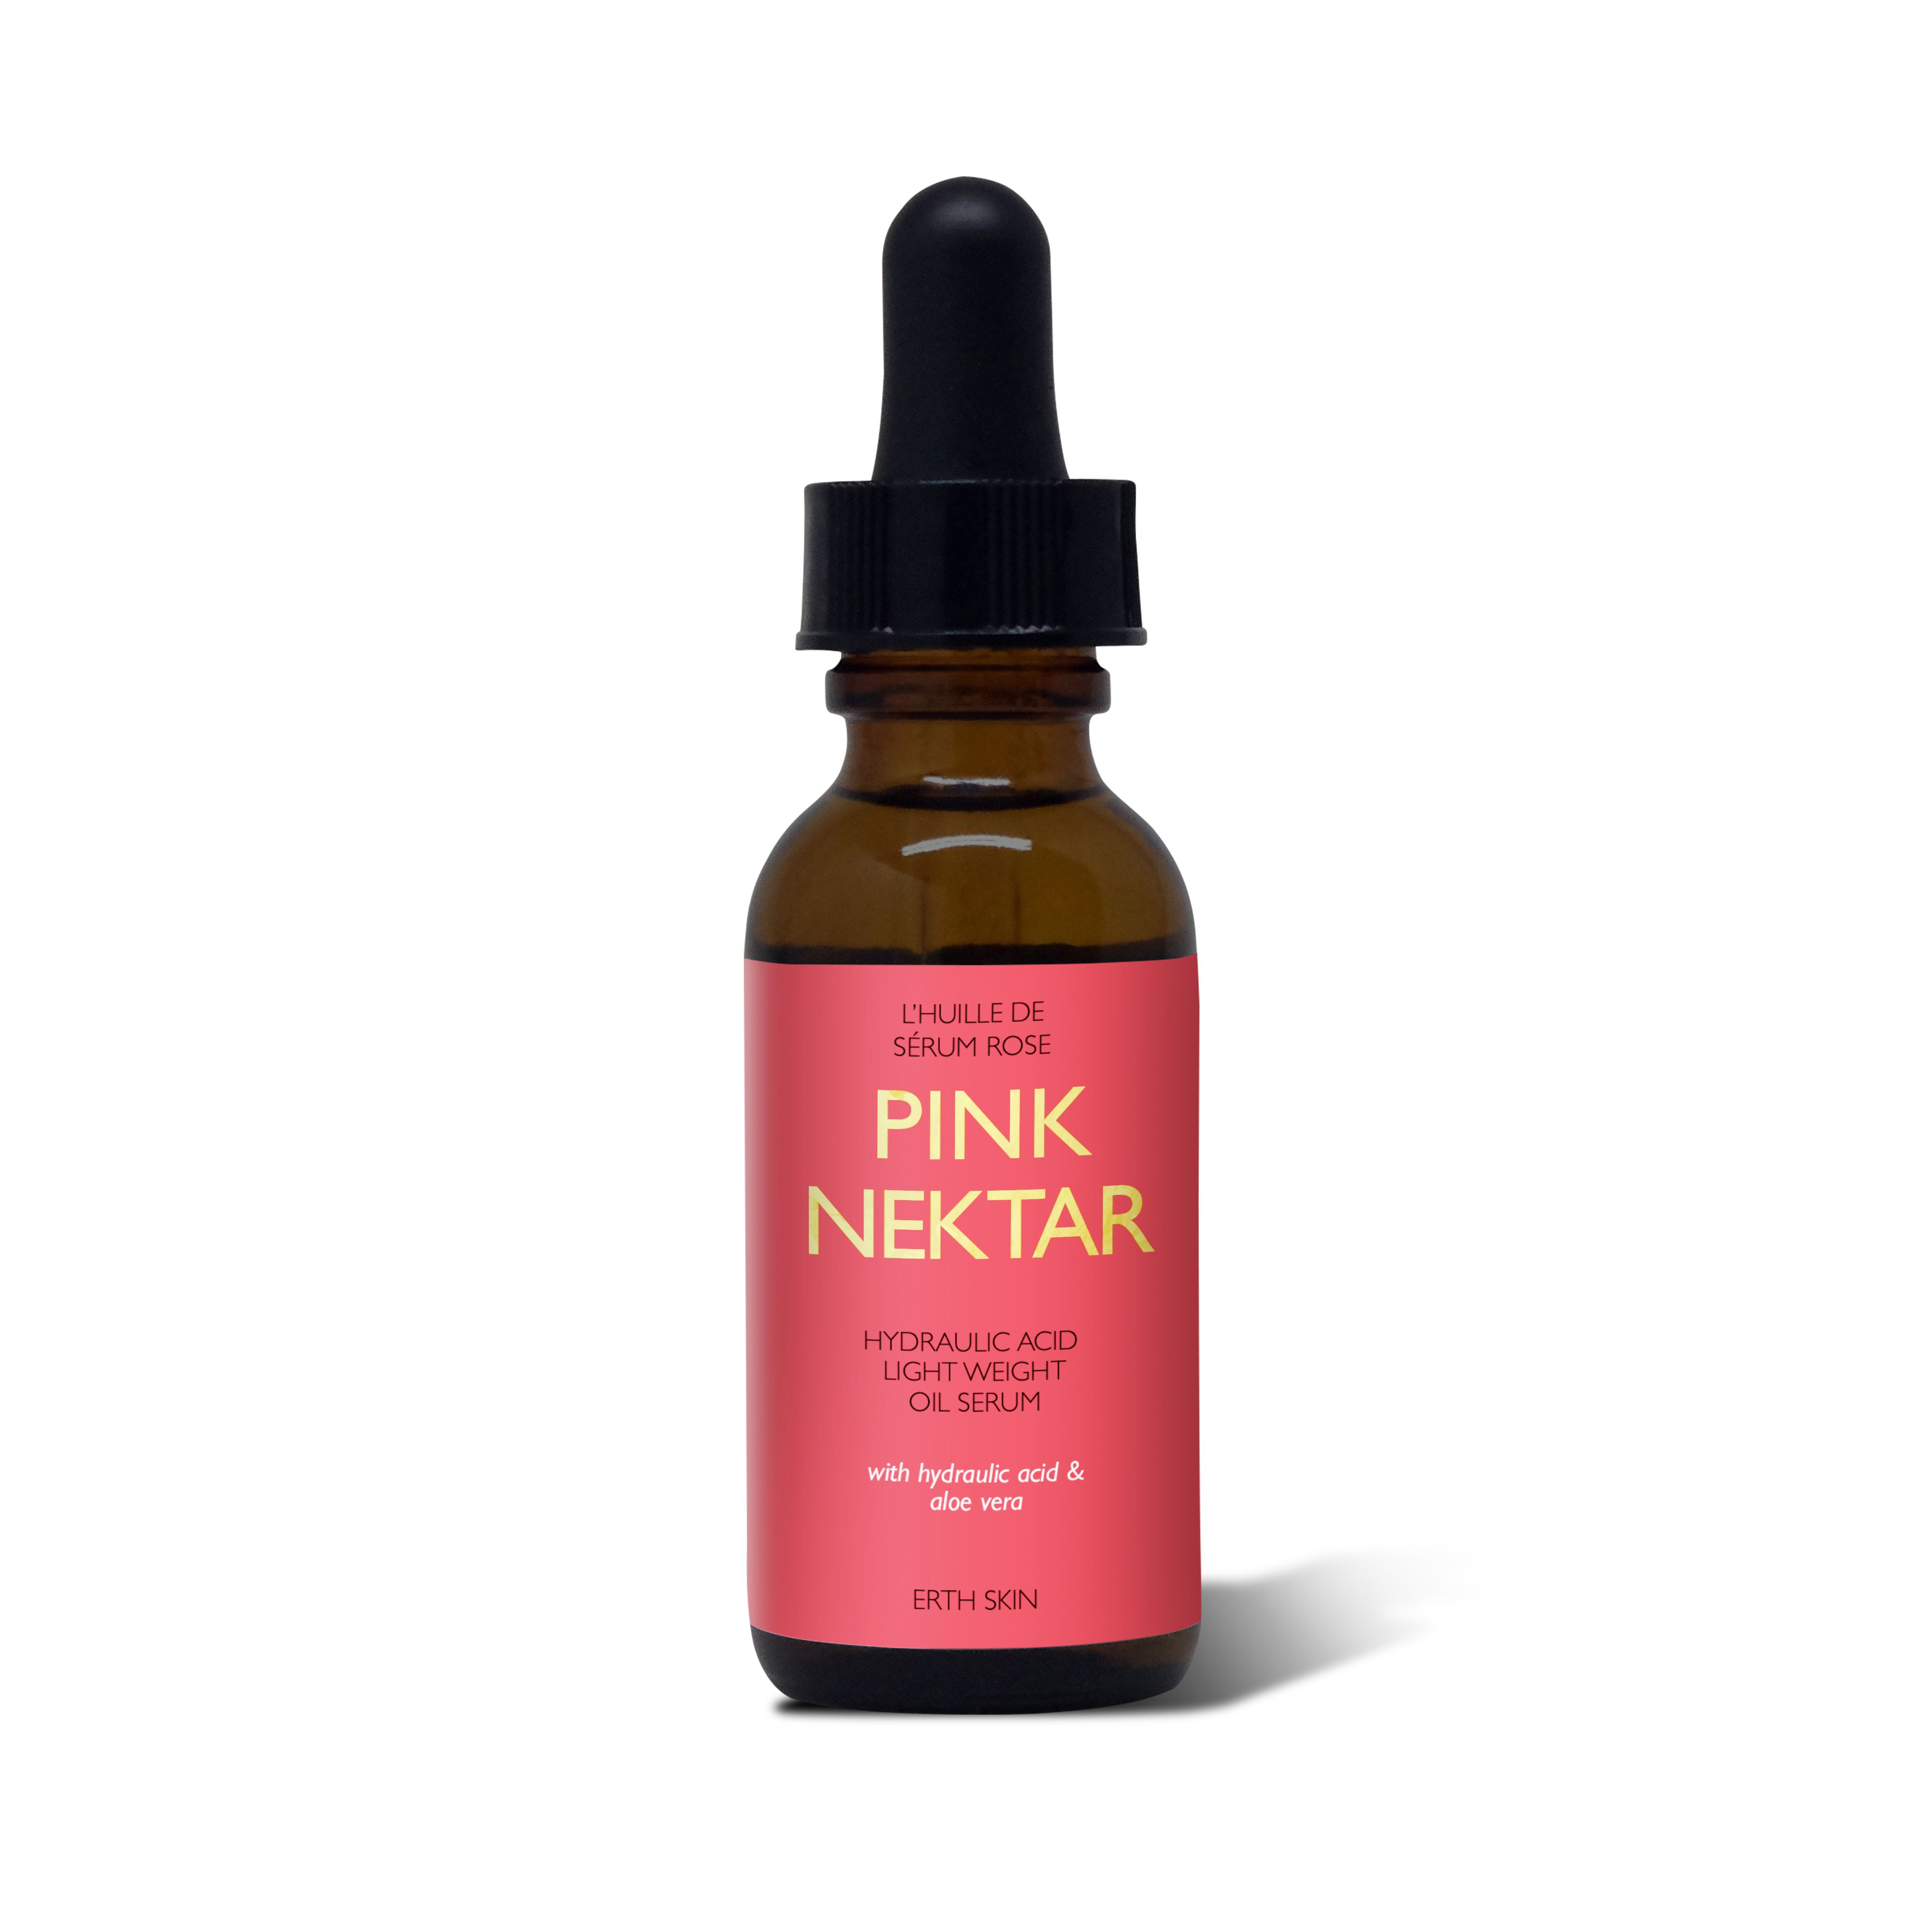 Pink Nectar is a natural light-weight serum that nourishes the skin with hydration. Specially formulated for sleep deprived and dehydrated skin that appears puffy and tired as it contains soothing complex of hyaluronic acid and aloe vera that aims to deeply hydrate, soothe and depuff. 
98% natural ingredients
light weight
light sweet nectar scent
nourishes the skin with light hydration
Hydrating complex of Hyaluronic acid and aloe vera
anti-pollution and firming ingredient complex
leaves skin feeling fresh and pure
antioxidant rich
Usage: Apply 2-3 drops to cleansed skin morning and night, continue with a moisturiser. Warning: Discontinue use of redness or irritation occurs. Avoid direct contact with eyes. Do not digest.